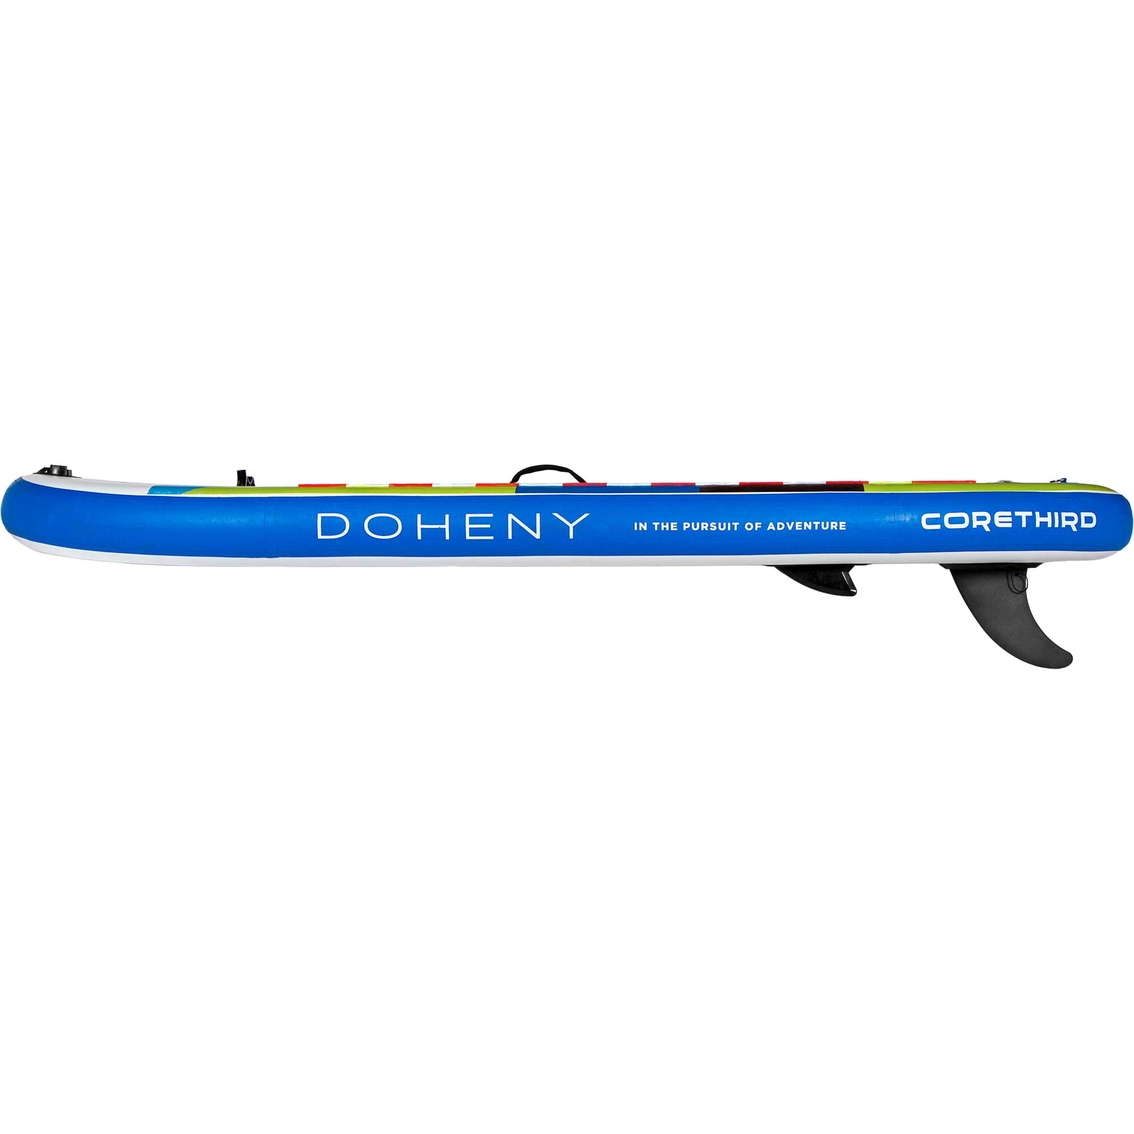 Core Third Doheny Inflatable Paddle Board - Image 6 of 8